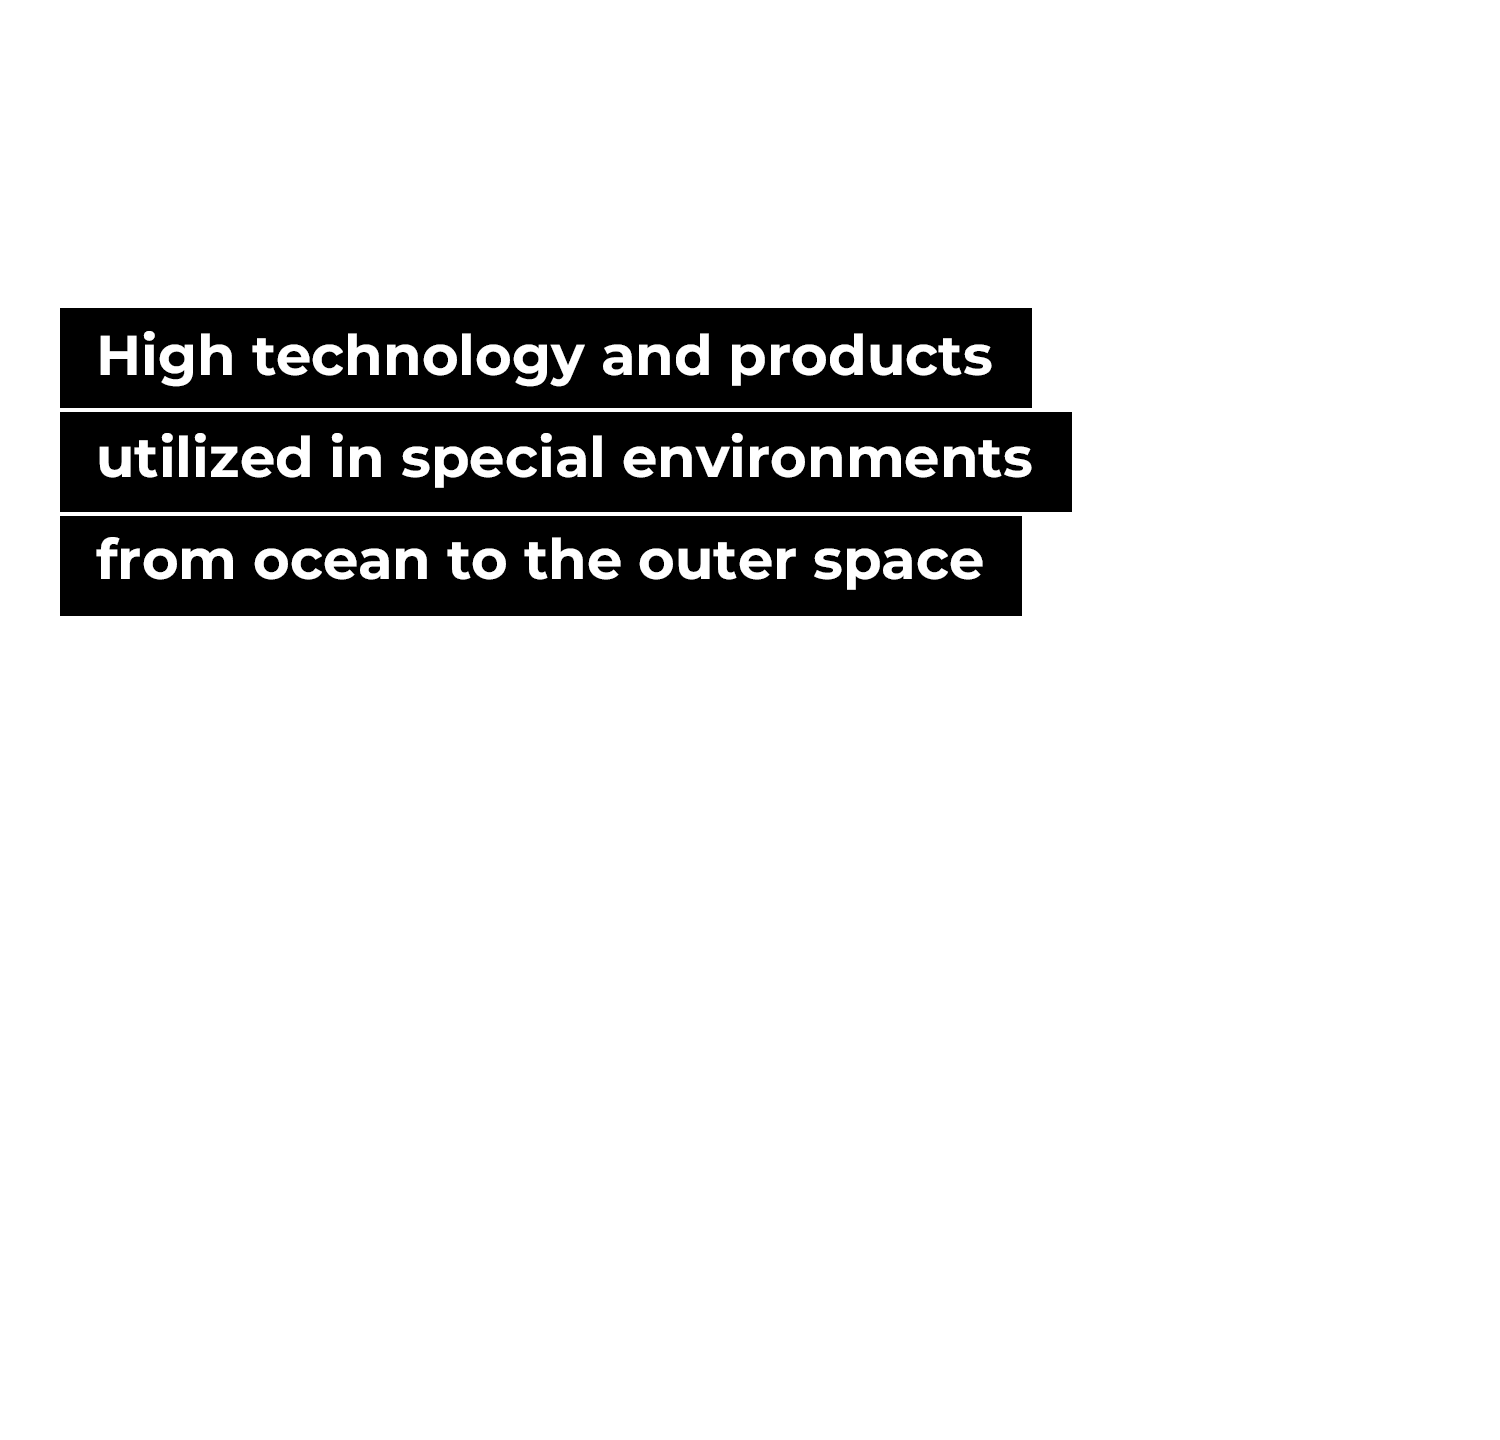 High technology and products utilized in special environments from ocean to the outer space